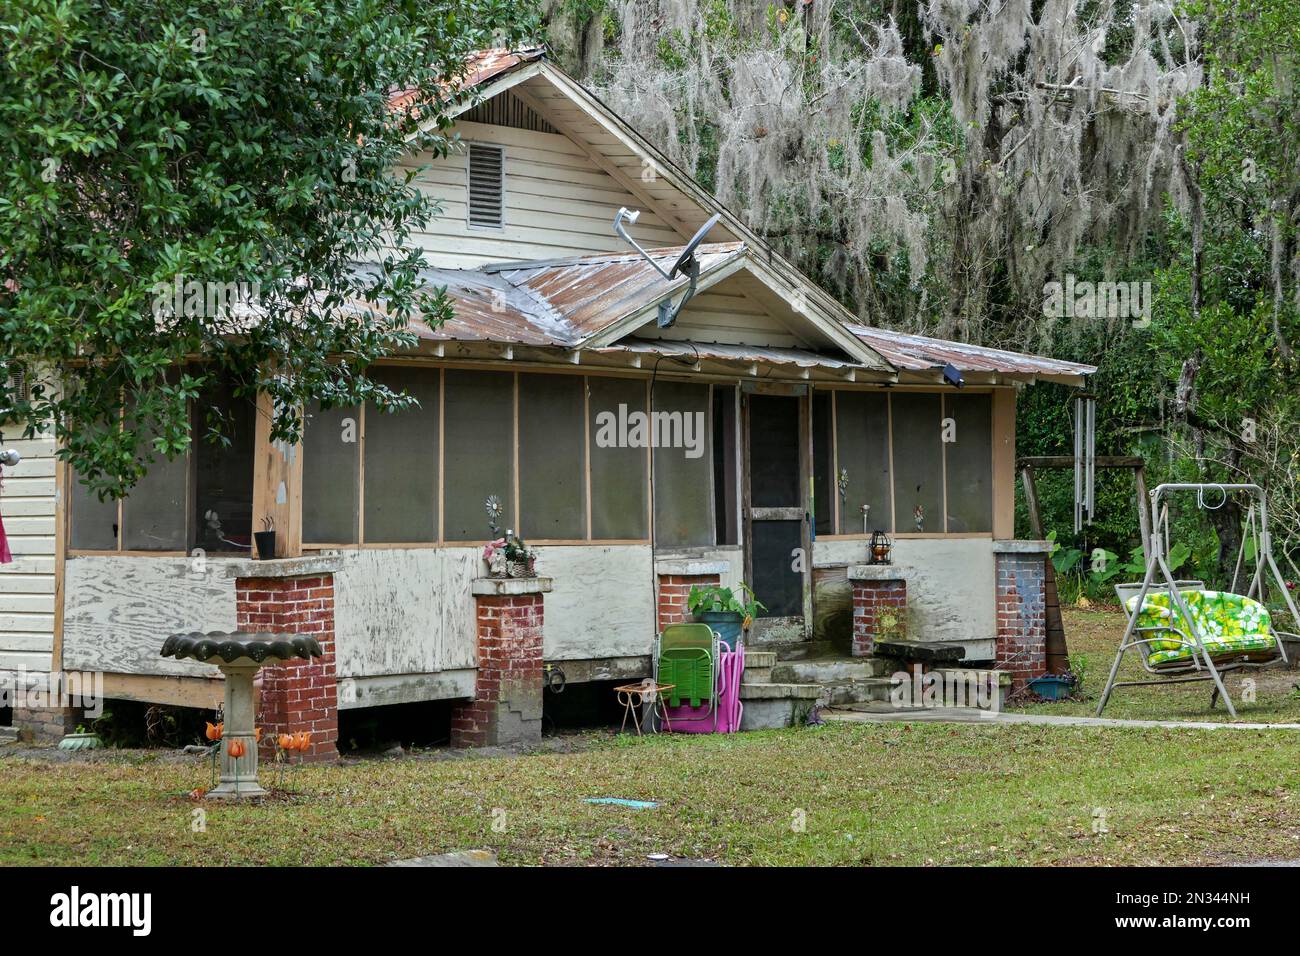 An old Florida Cracker house in a small North Florida town. Stock Photo